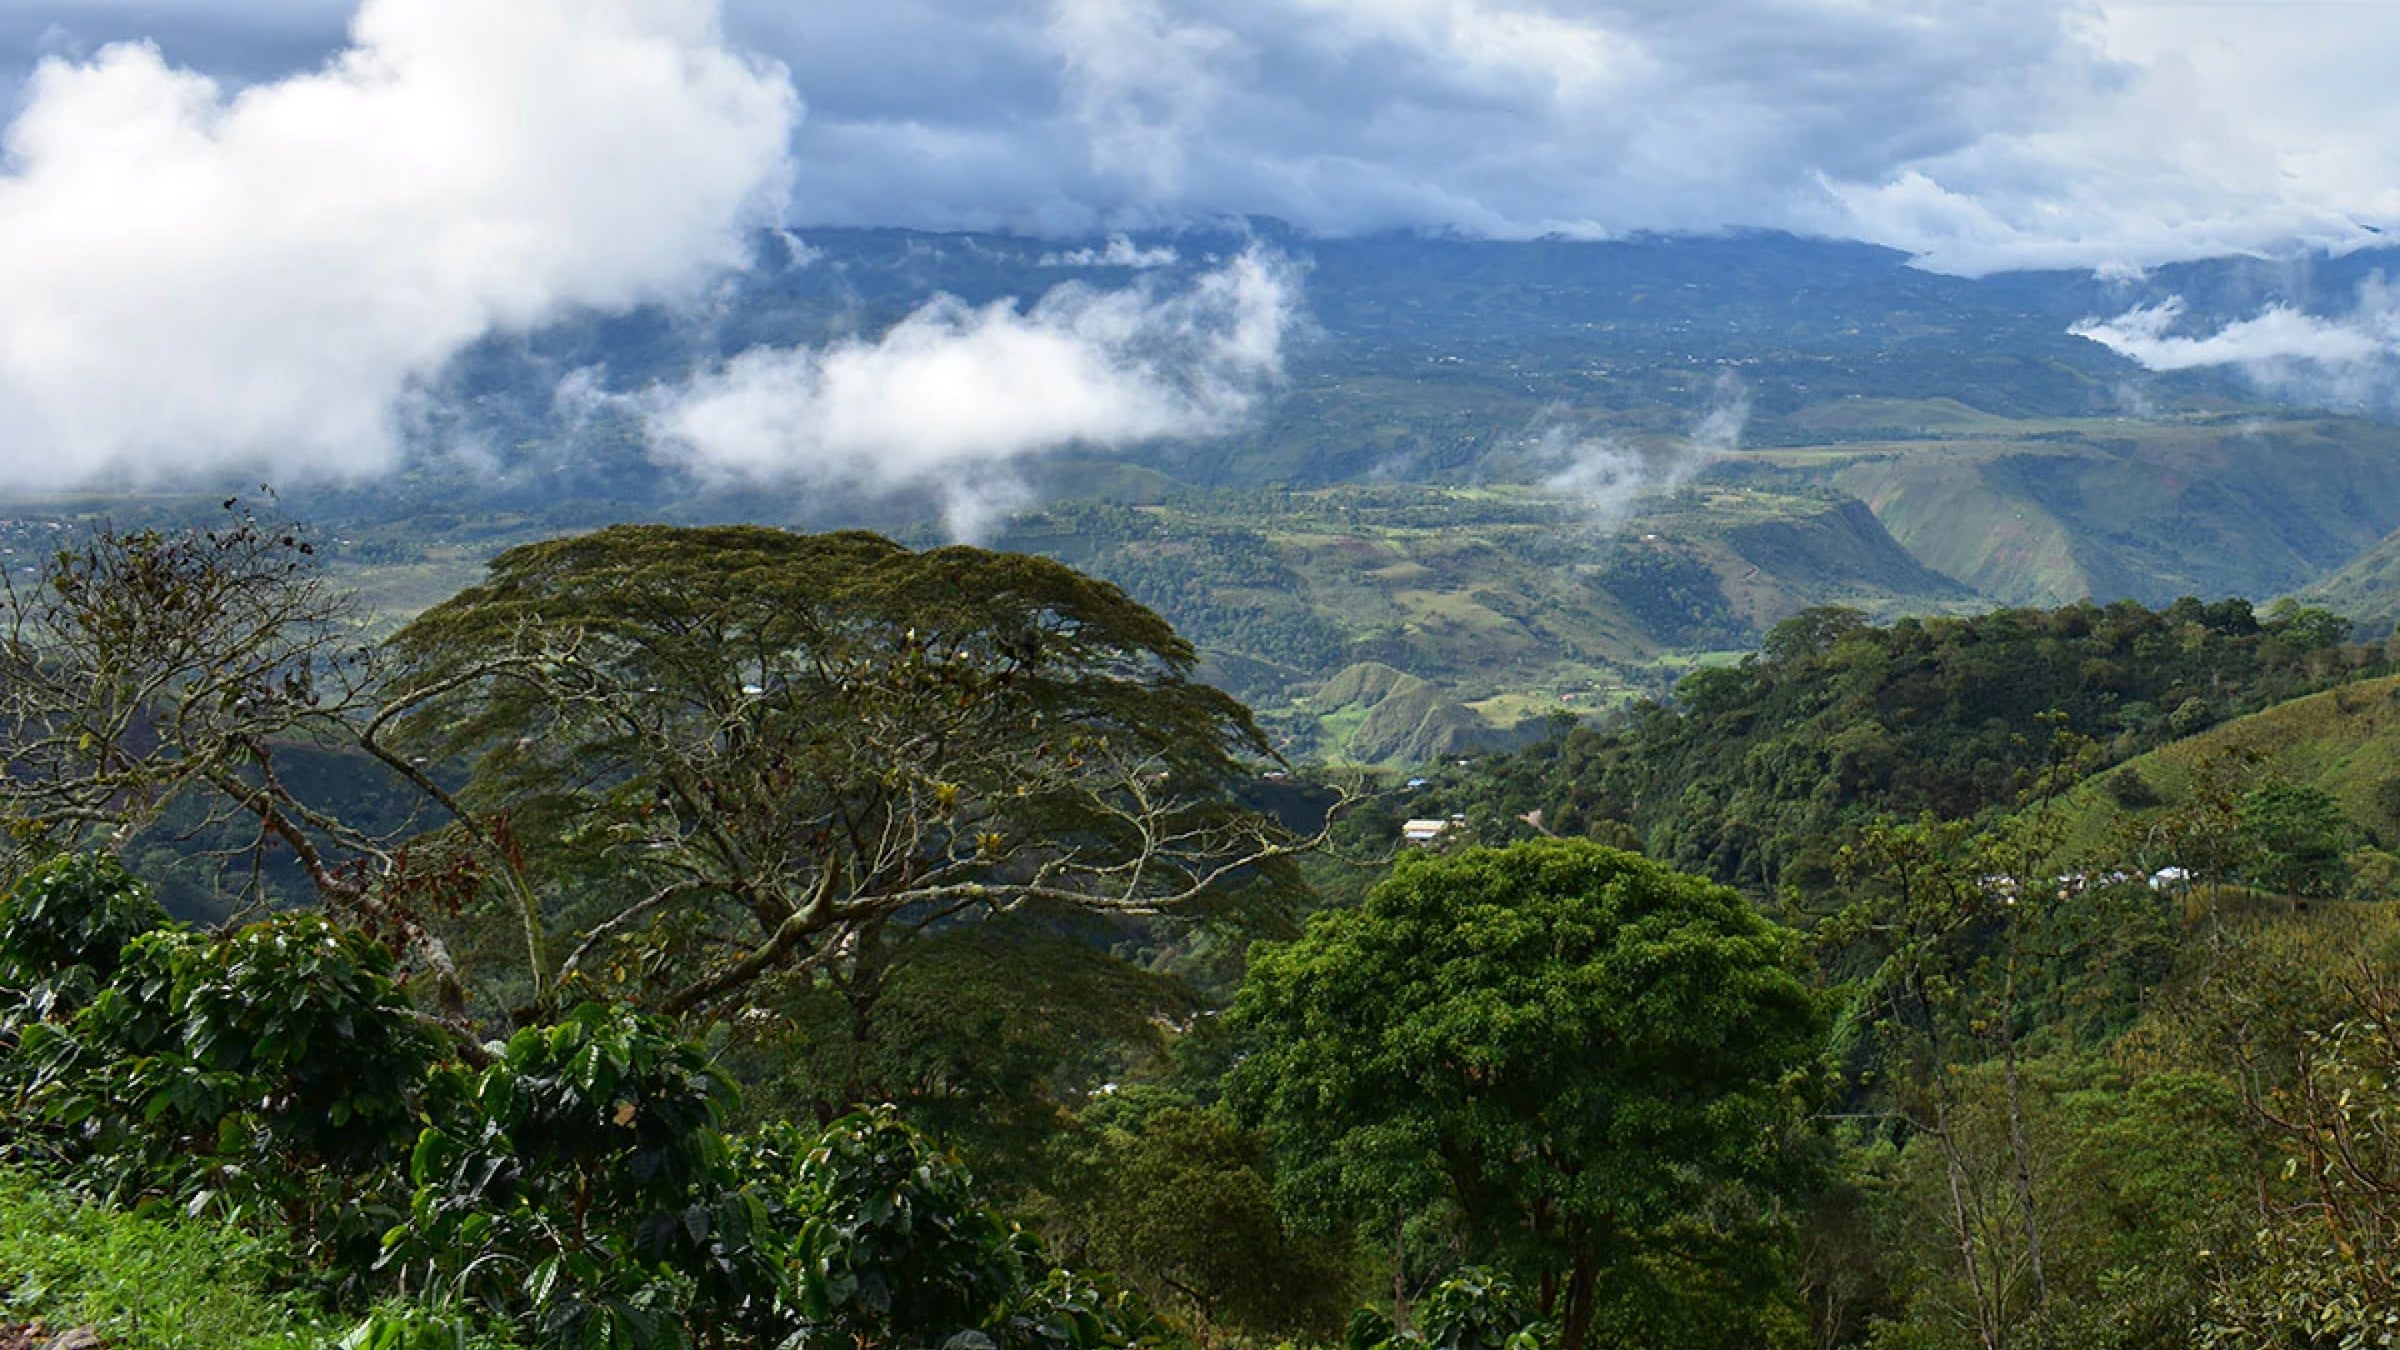 A vast rainforest stretches across the horizon with tall trees and clouds